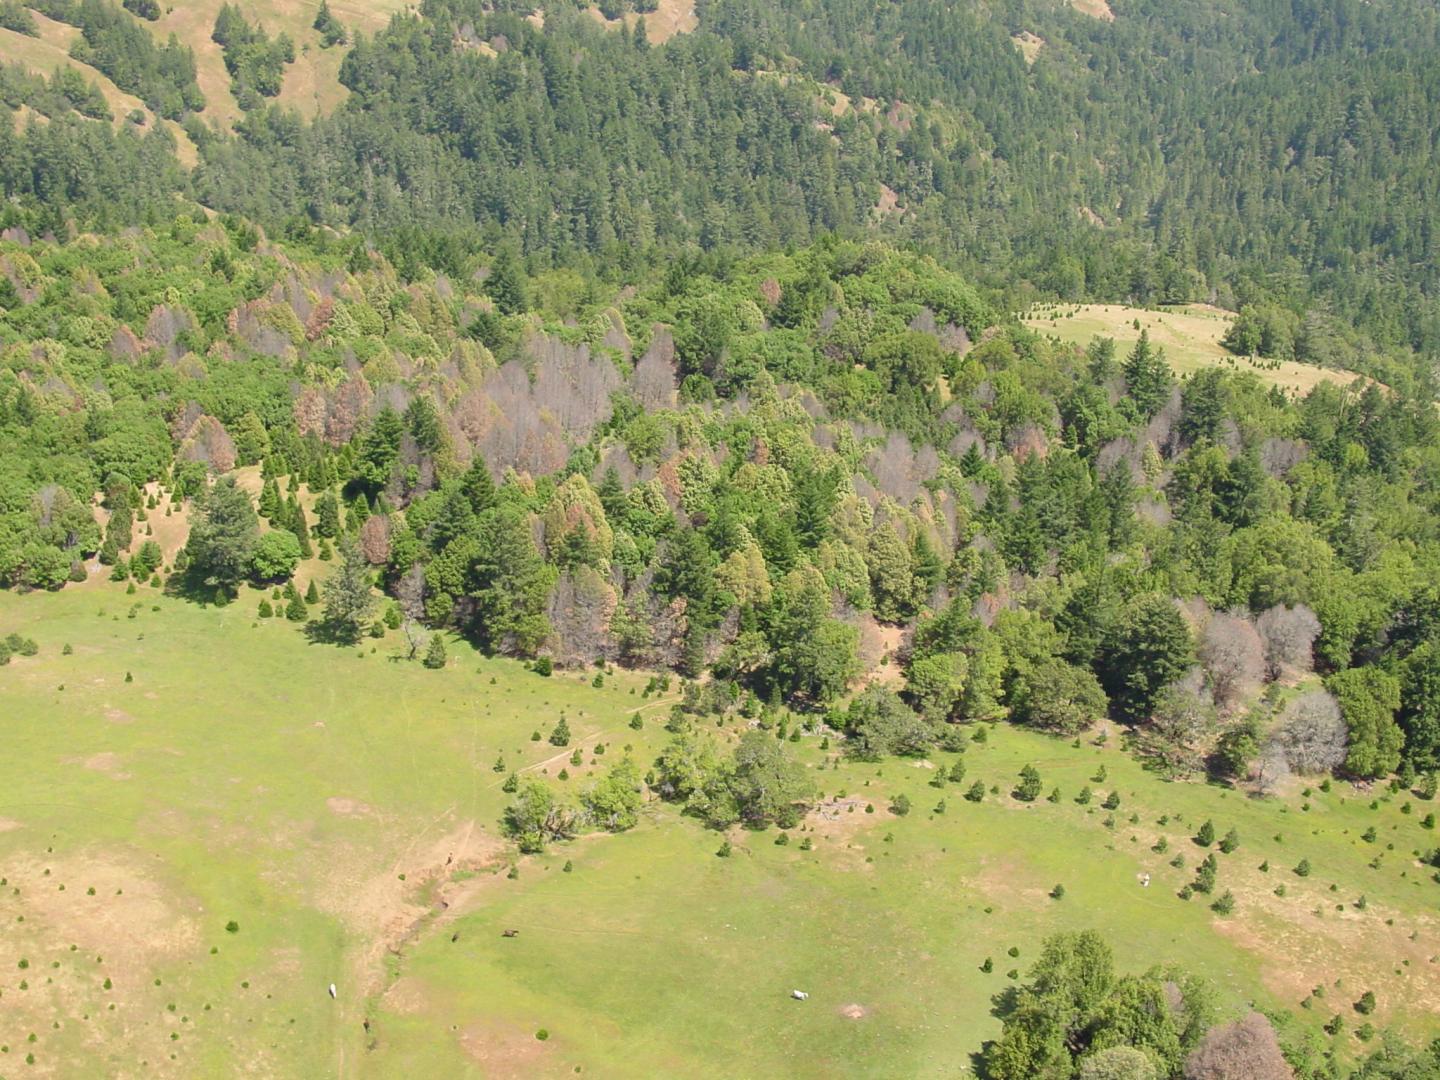 Large-Scale Tree Mortality in Northern Sonoma County, California